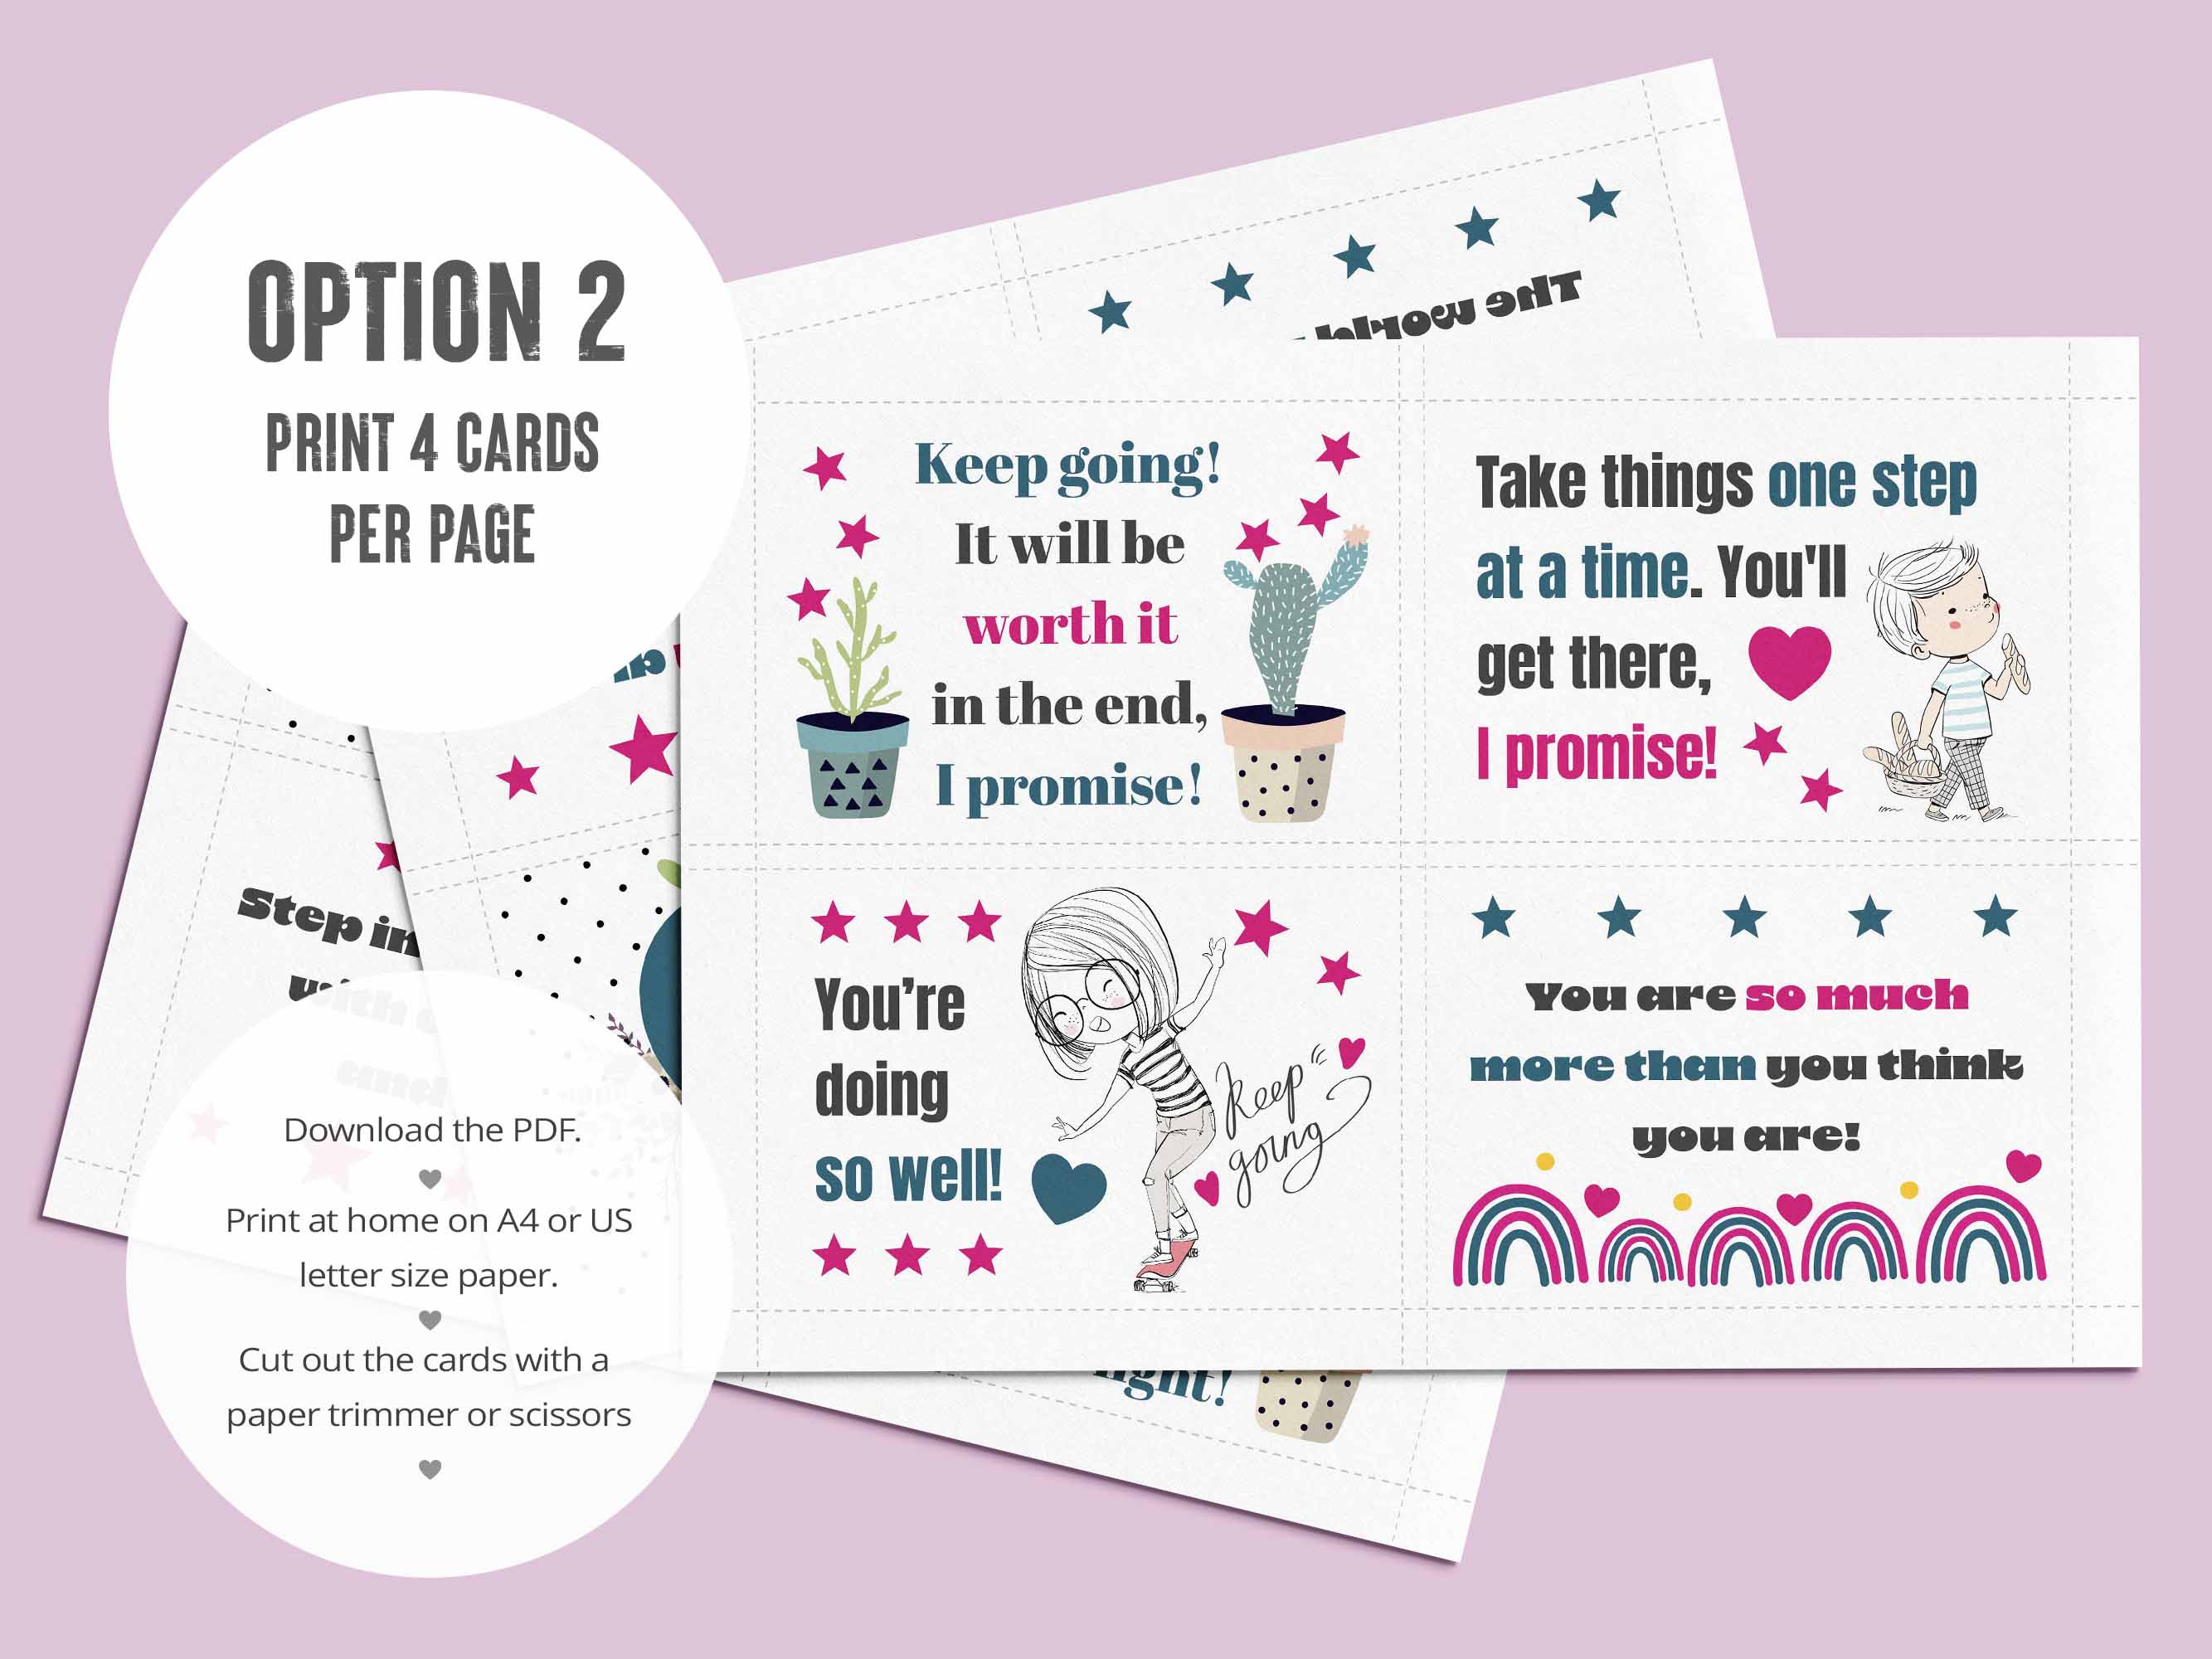 Option Two: Print 4 cards to a page. 24 printable kindness cards with words of encouragement. 